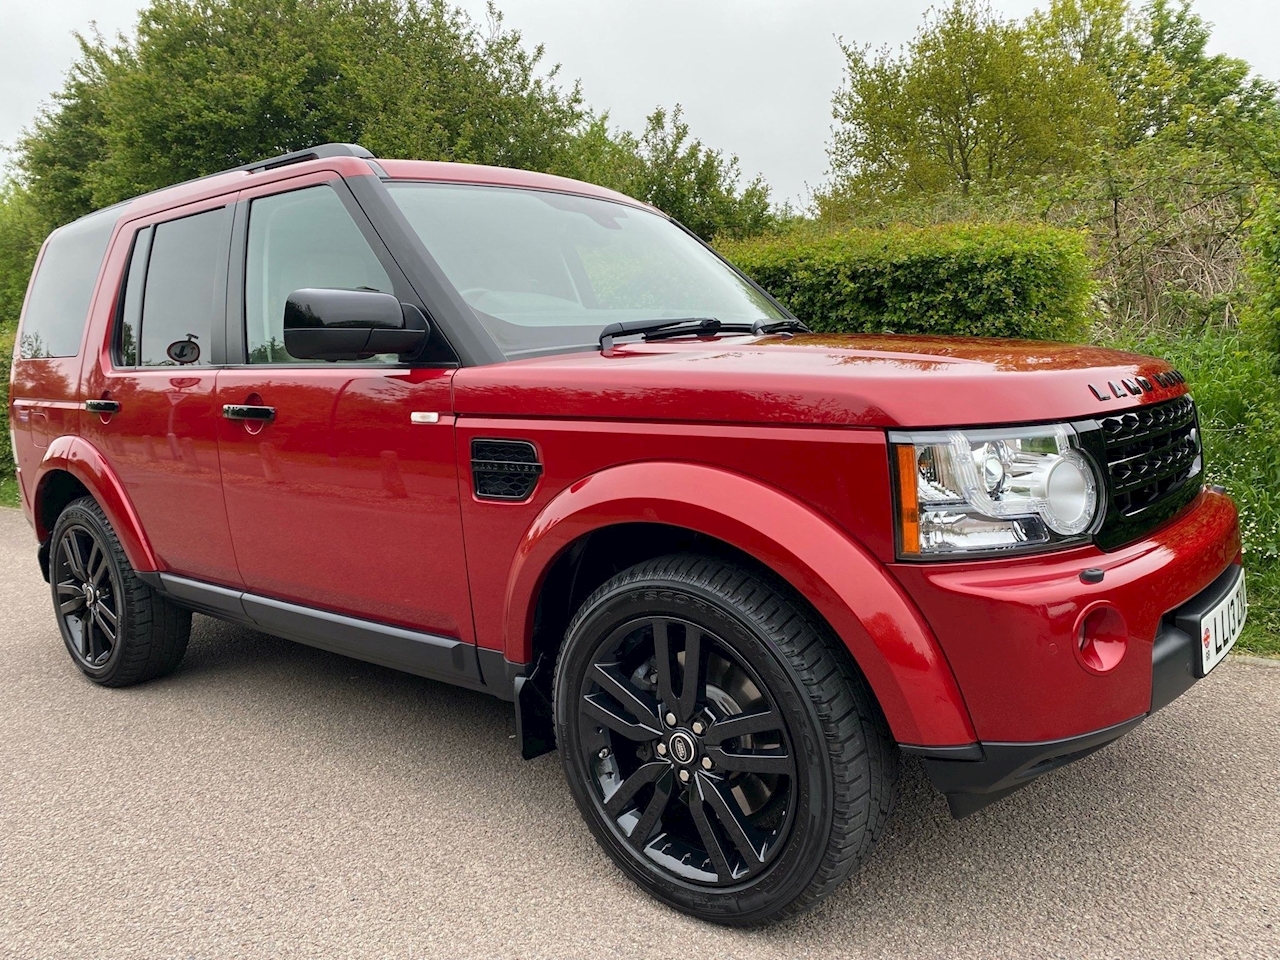 Discovery 4 3.0 SD V6 HSE Luxury Auto 4WD Euro 5 5dr